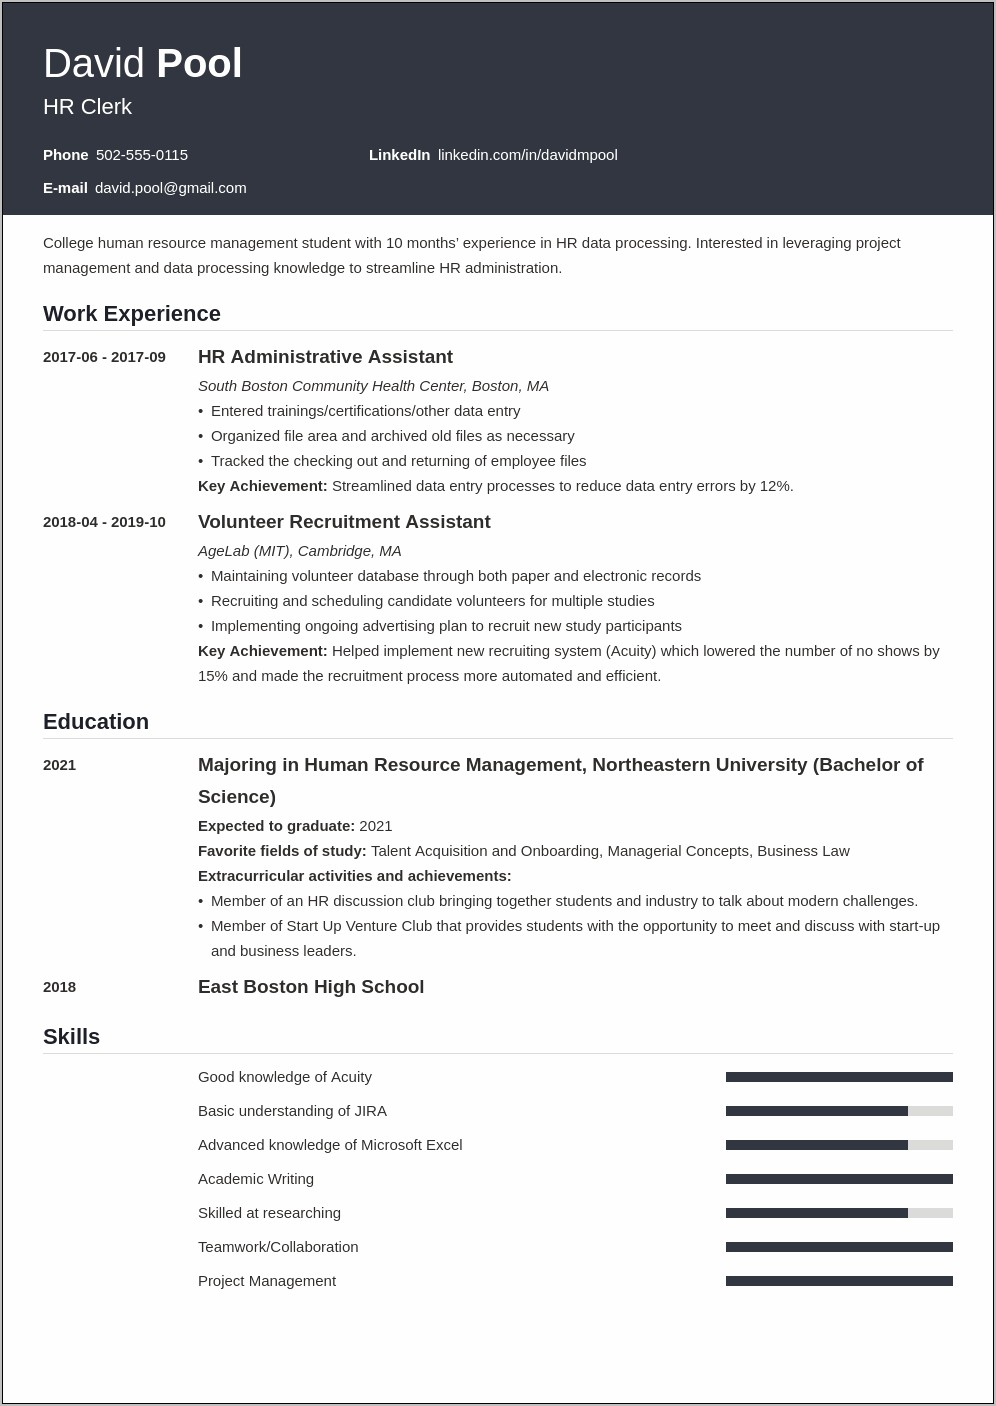 Resume Examples For Freshman College Students